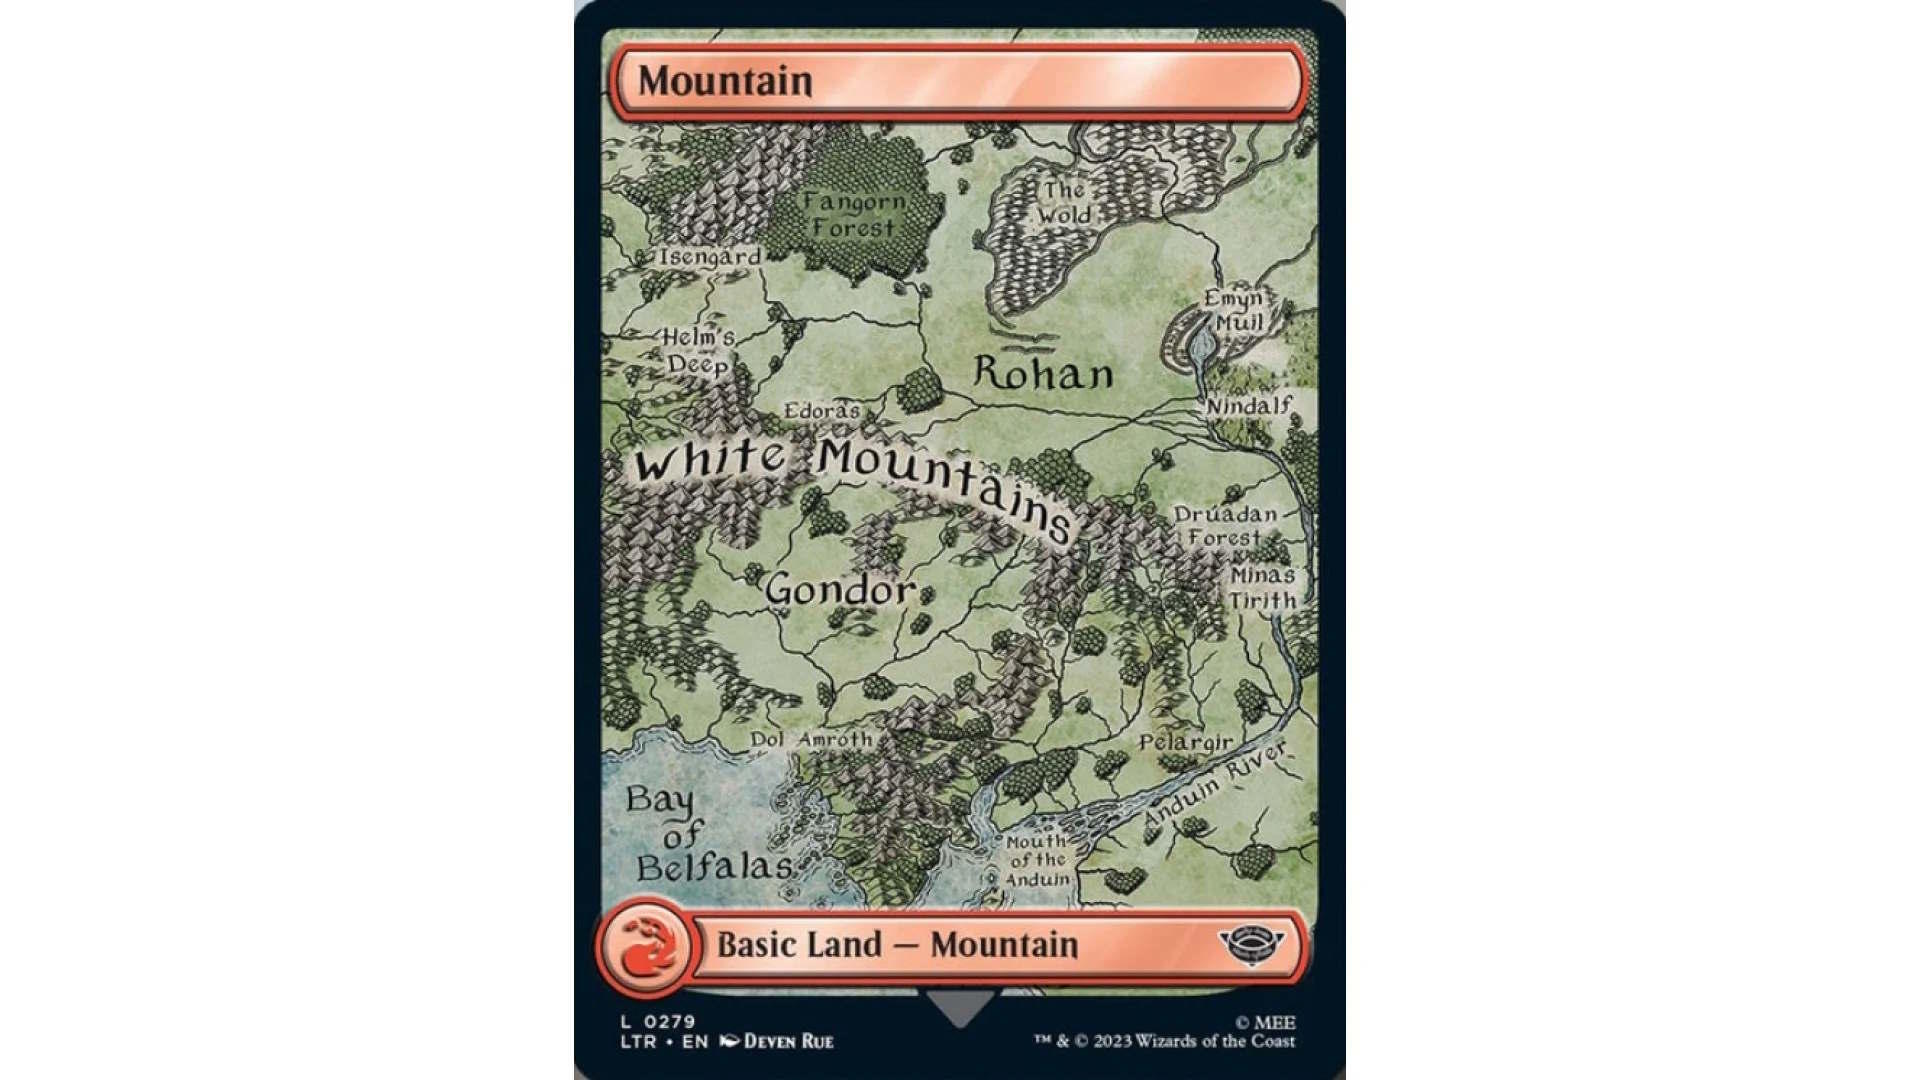 mtg-magic-the-gathering-cards-spoilers-lord-of-the-rings-lotr-lands-mountain.jpg